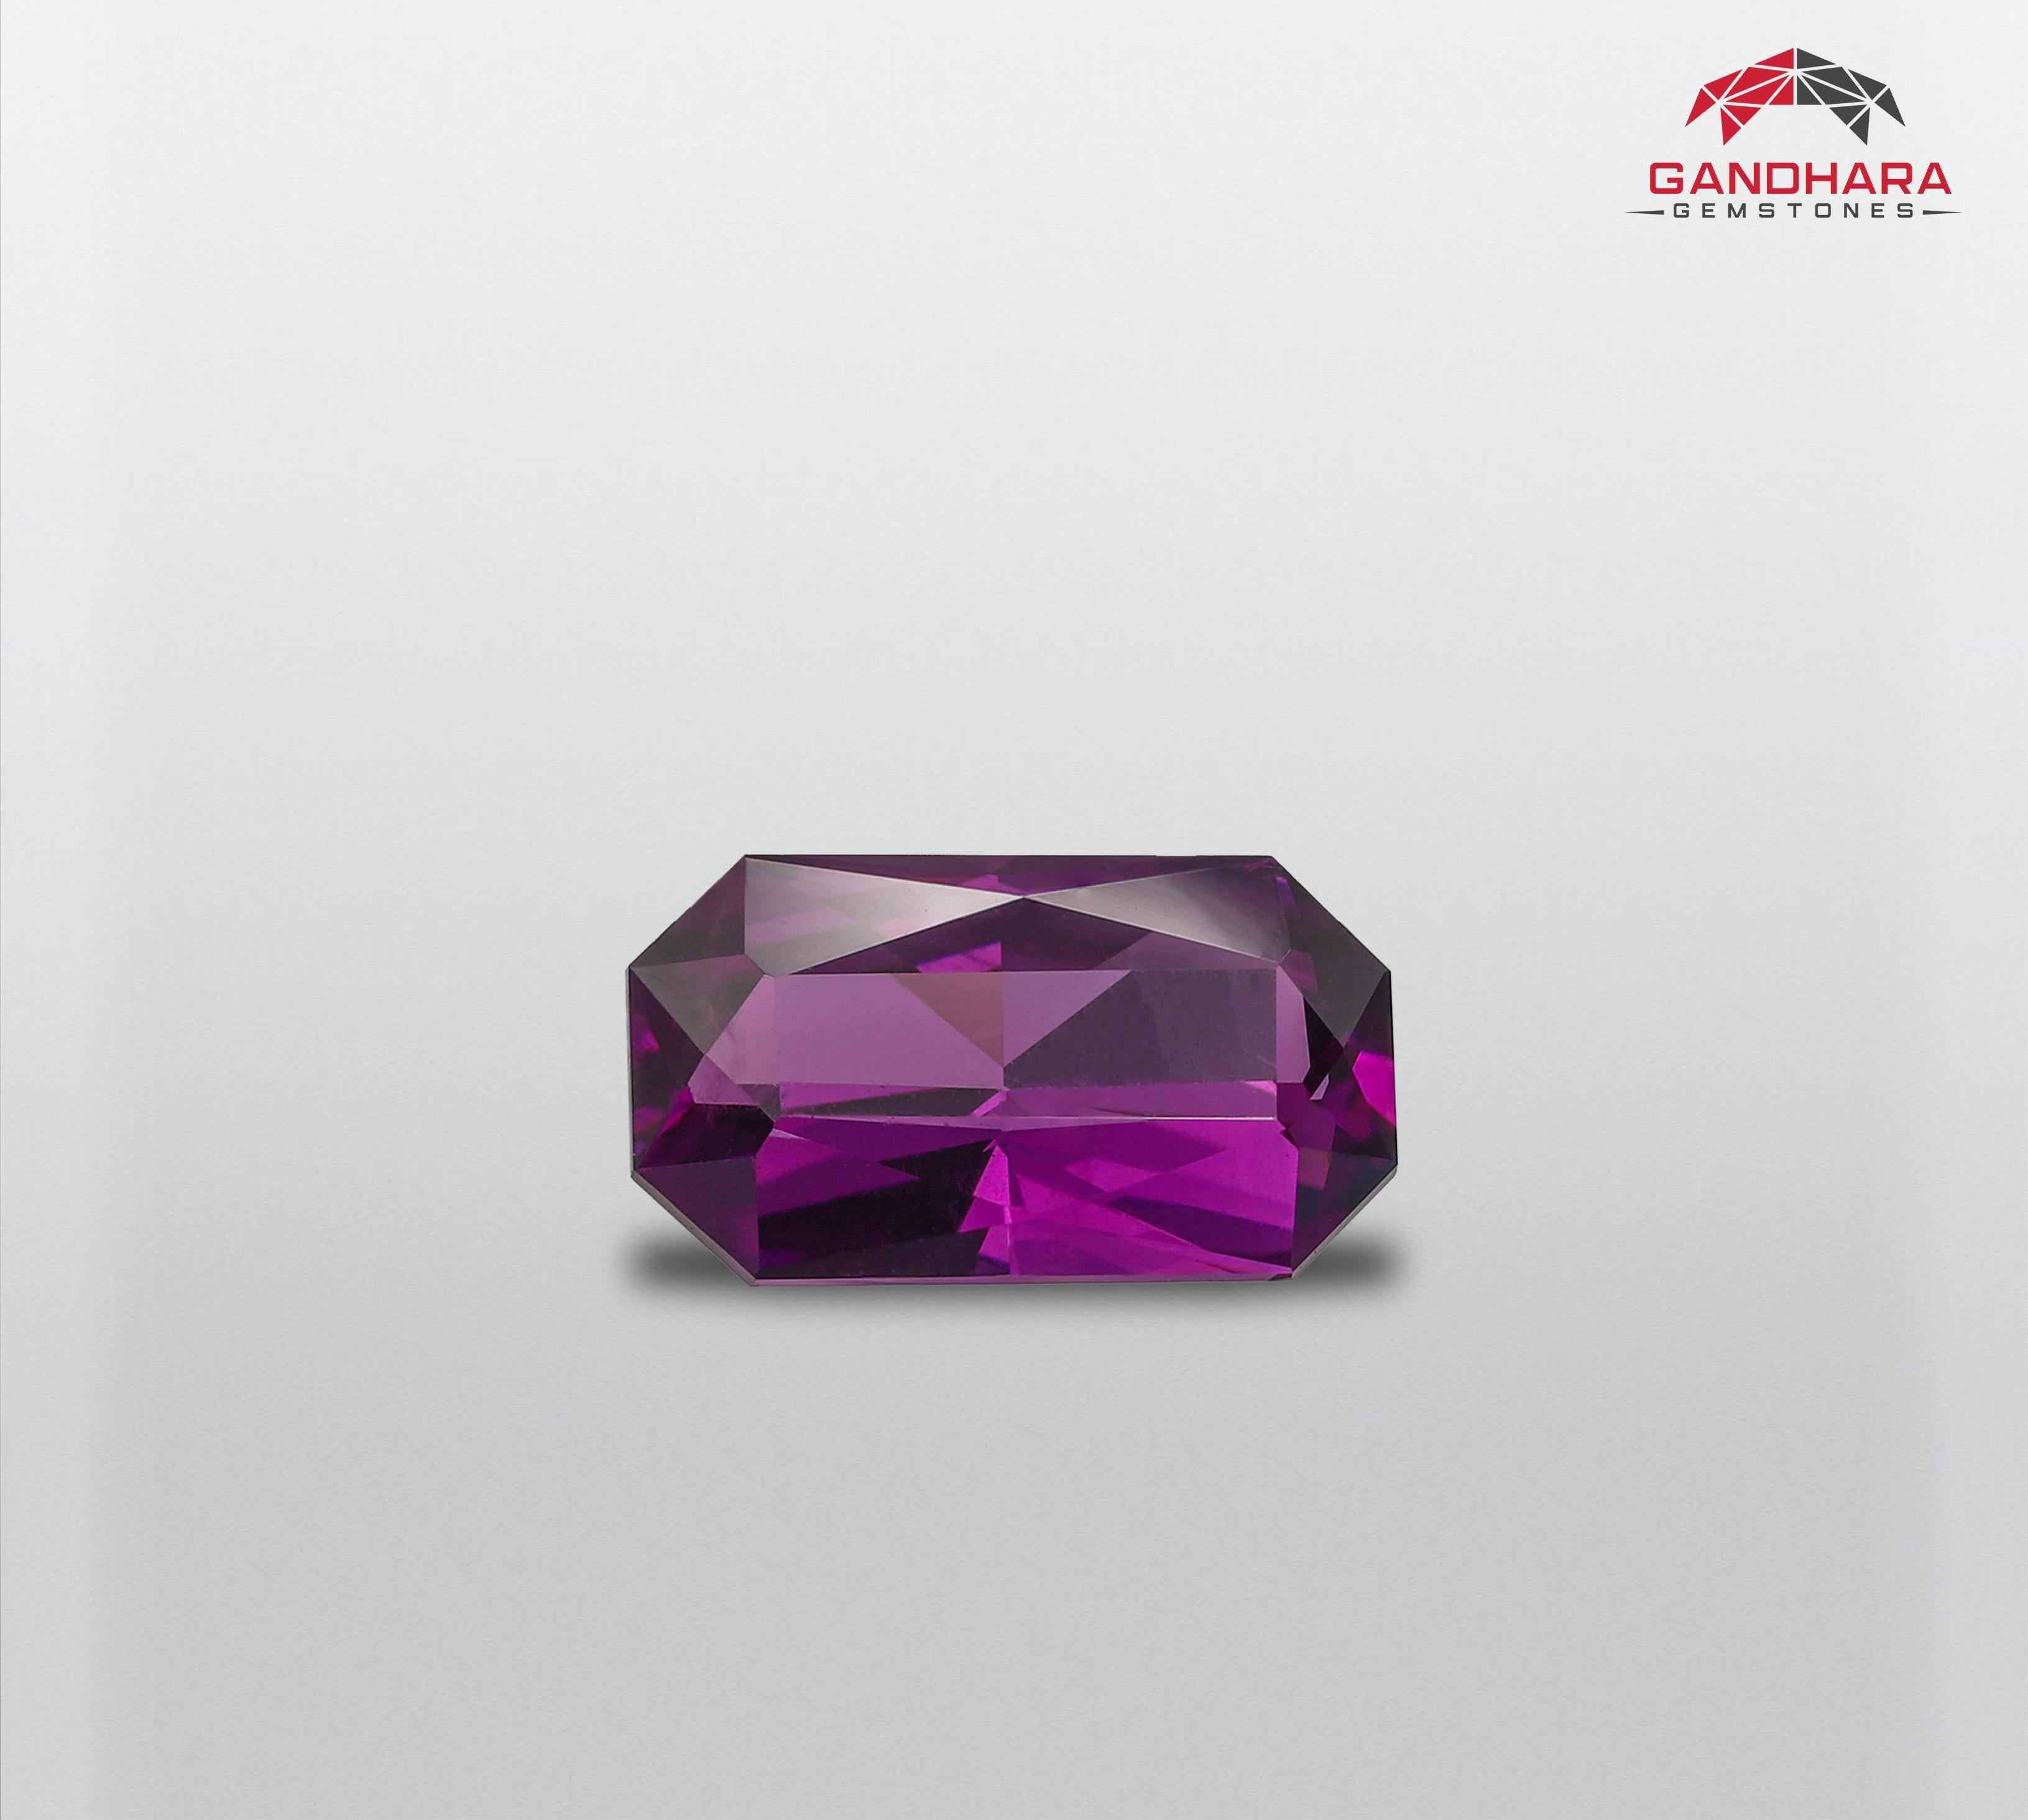 Incredible Royal Purple Pyrope Garnet, available for sale at wholesale price natural high quality, flawless 3.01 carats certified pyrope garnet gemstone from Madagascar.

Product Information:
GEMSTONE TYPE:	Incredible Royal Purple Pyrope